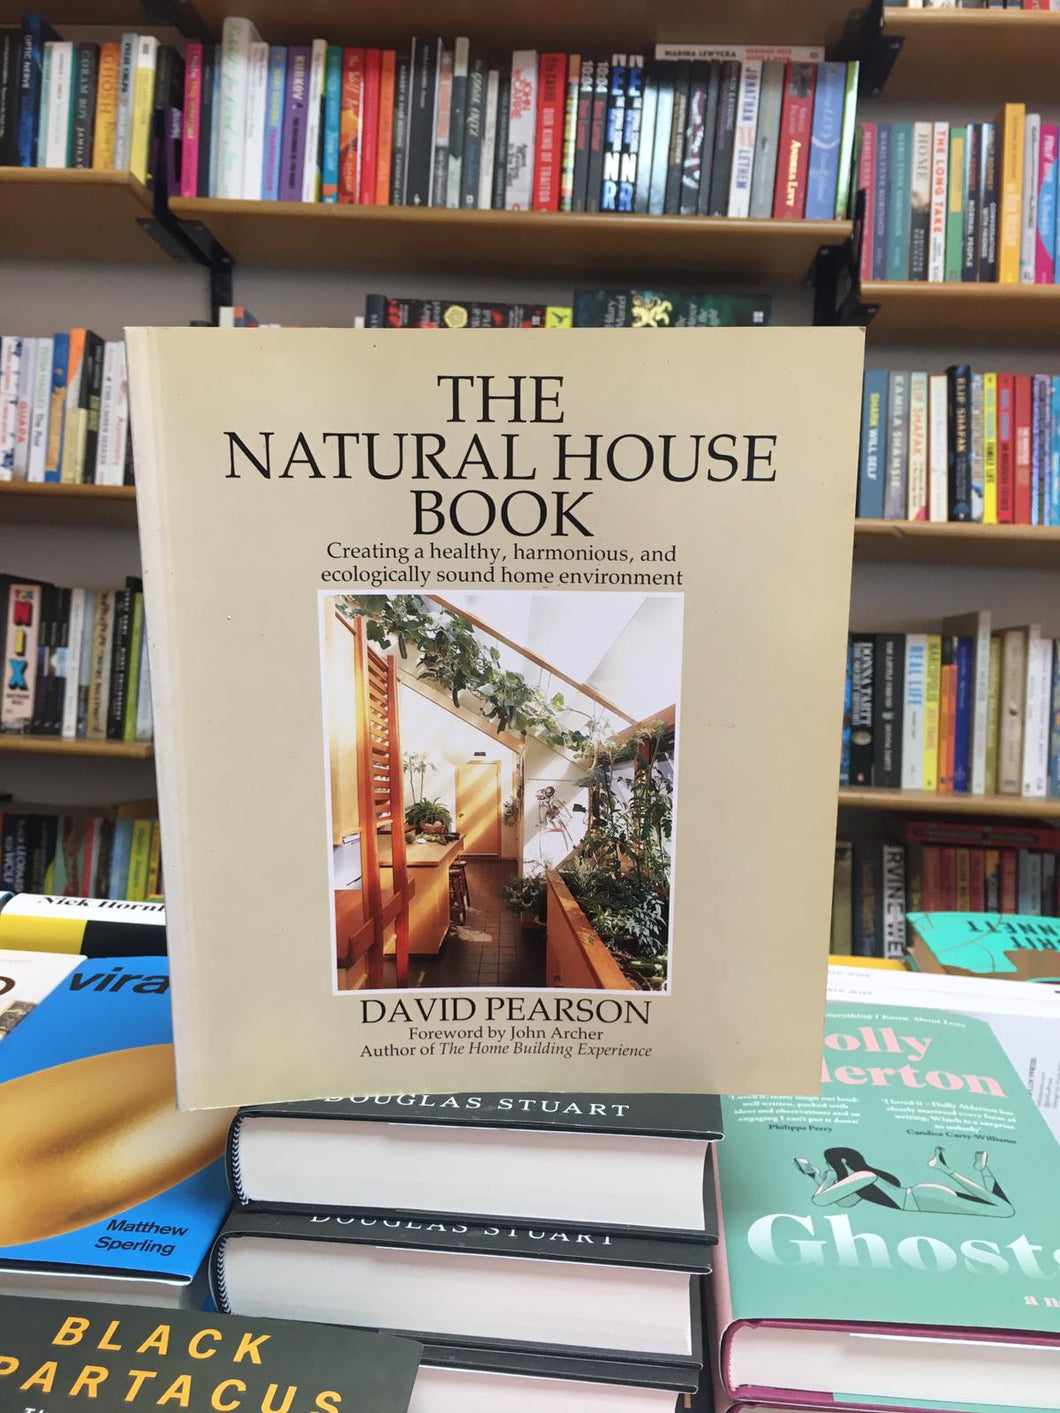 The Natural House Book